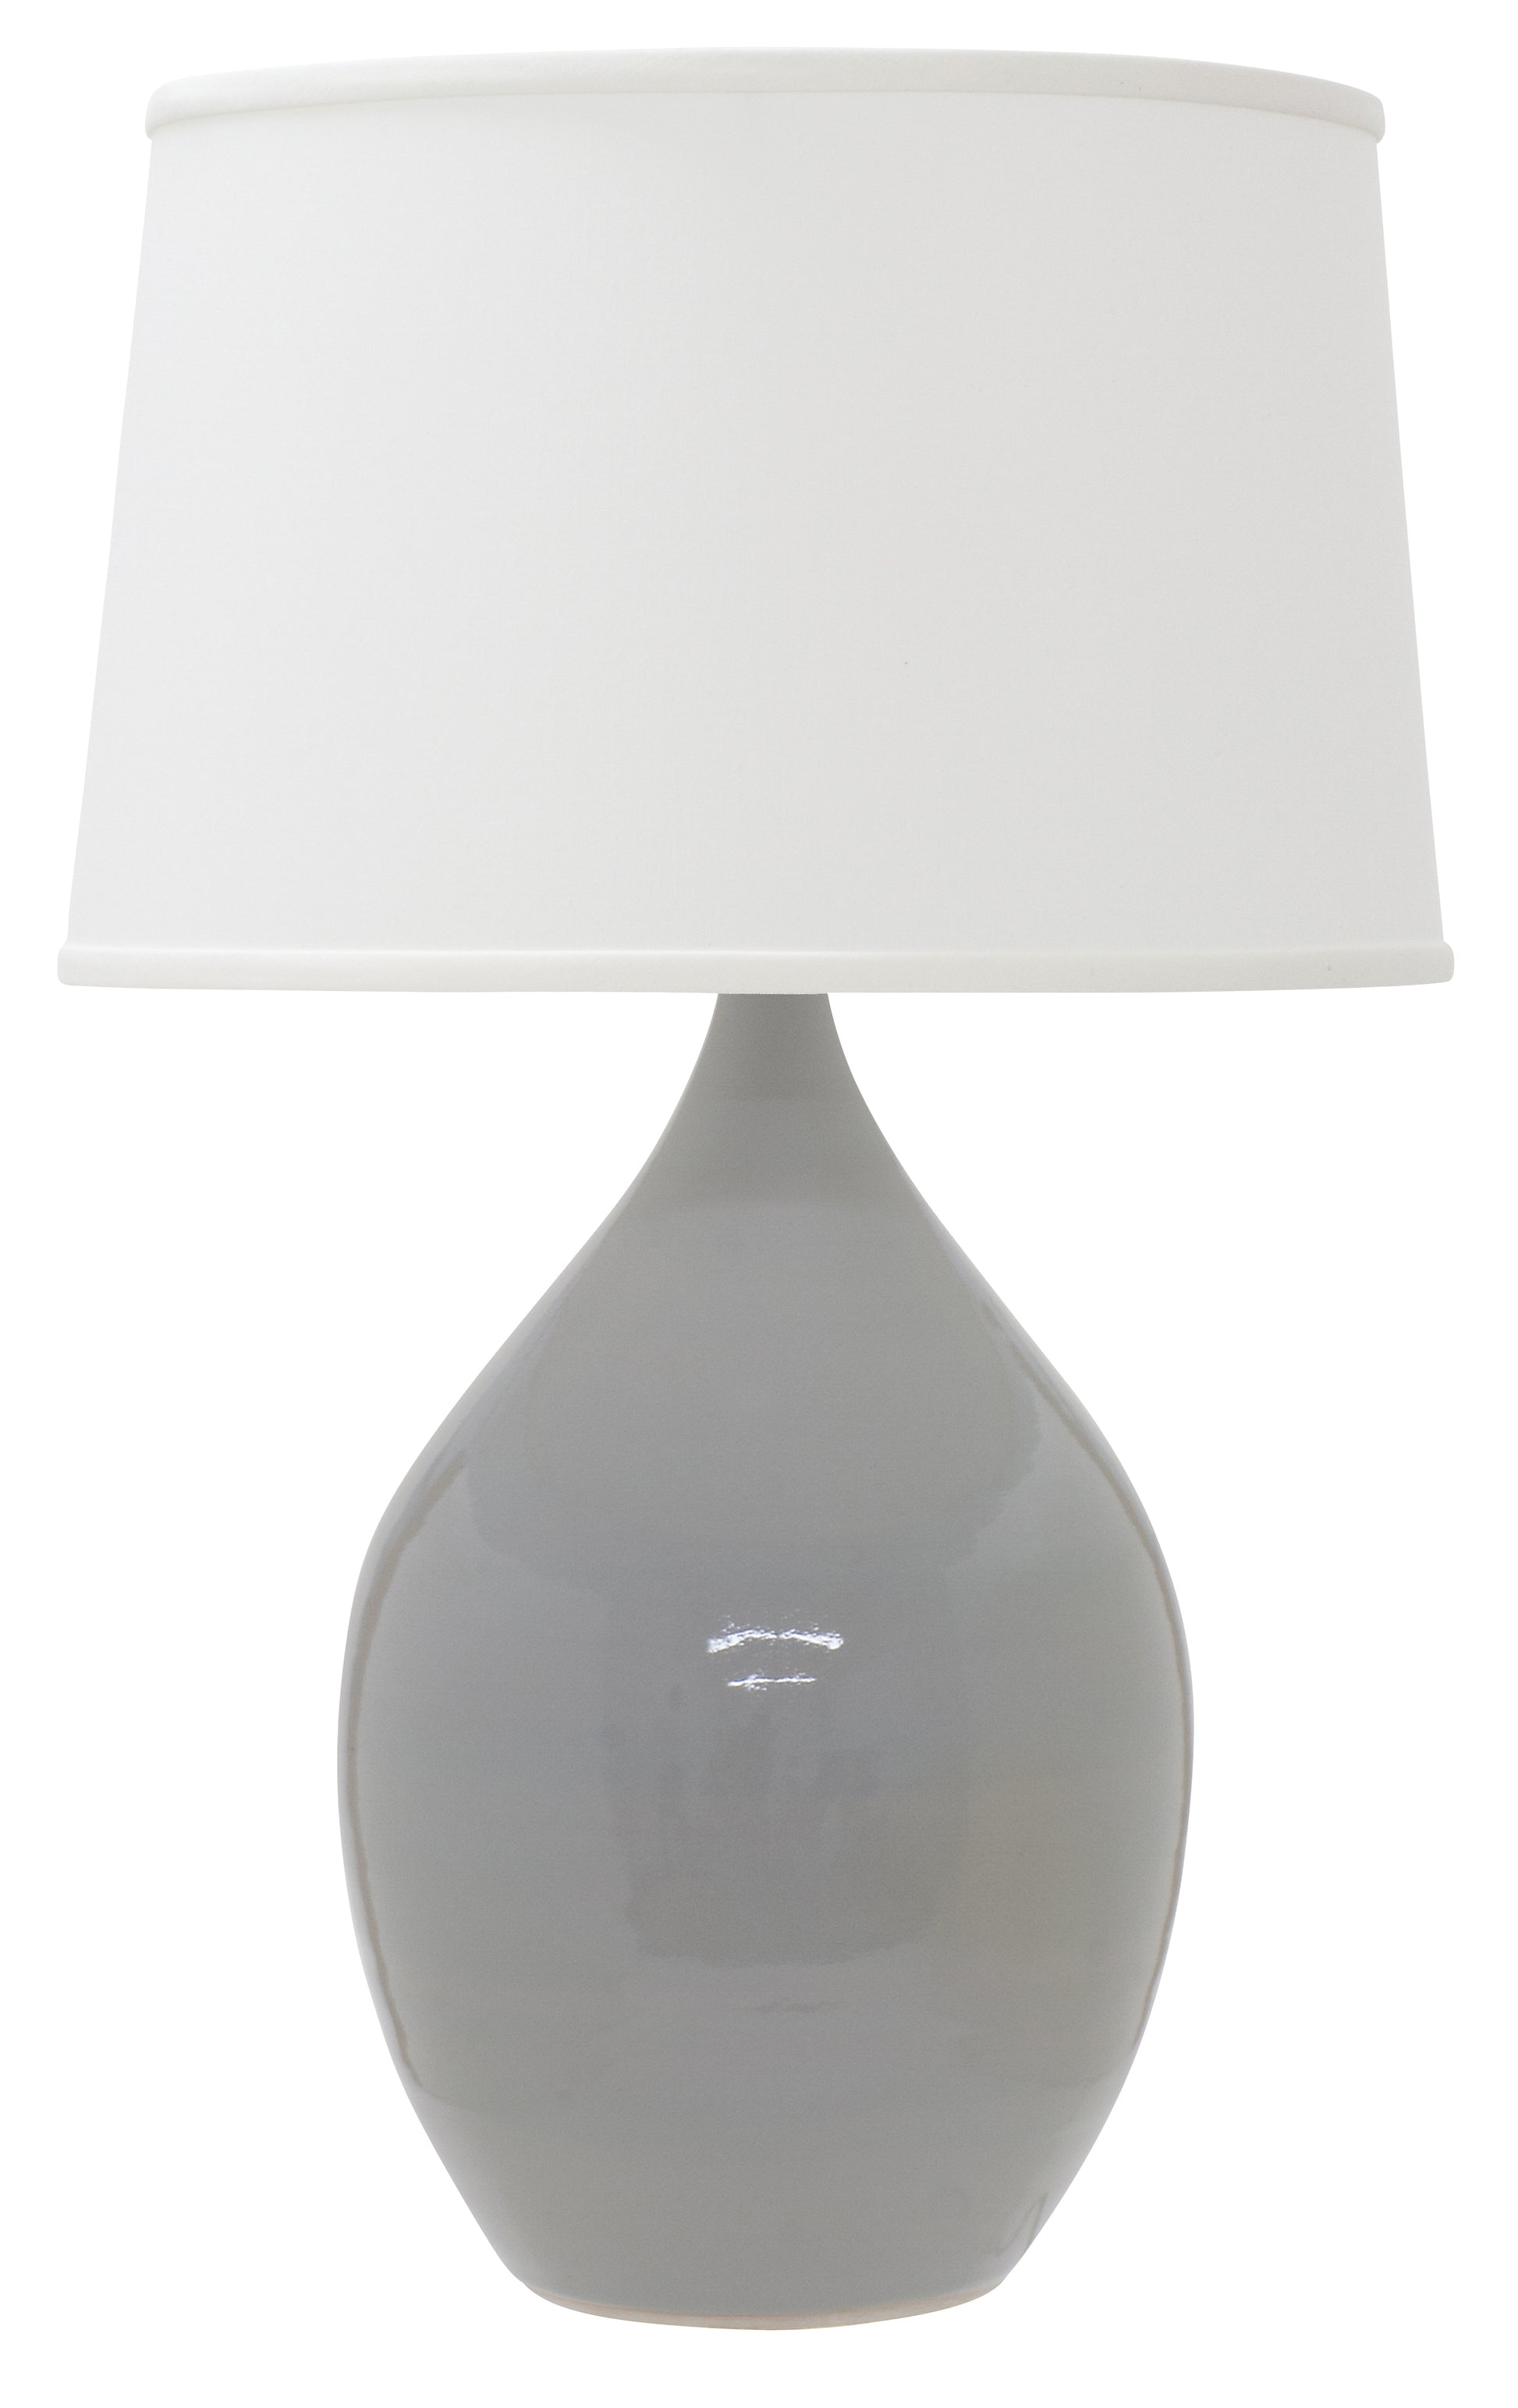 House of Troy Scatchard 21" Stoneware Table Lamp in Gray Gloss GS302-GG